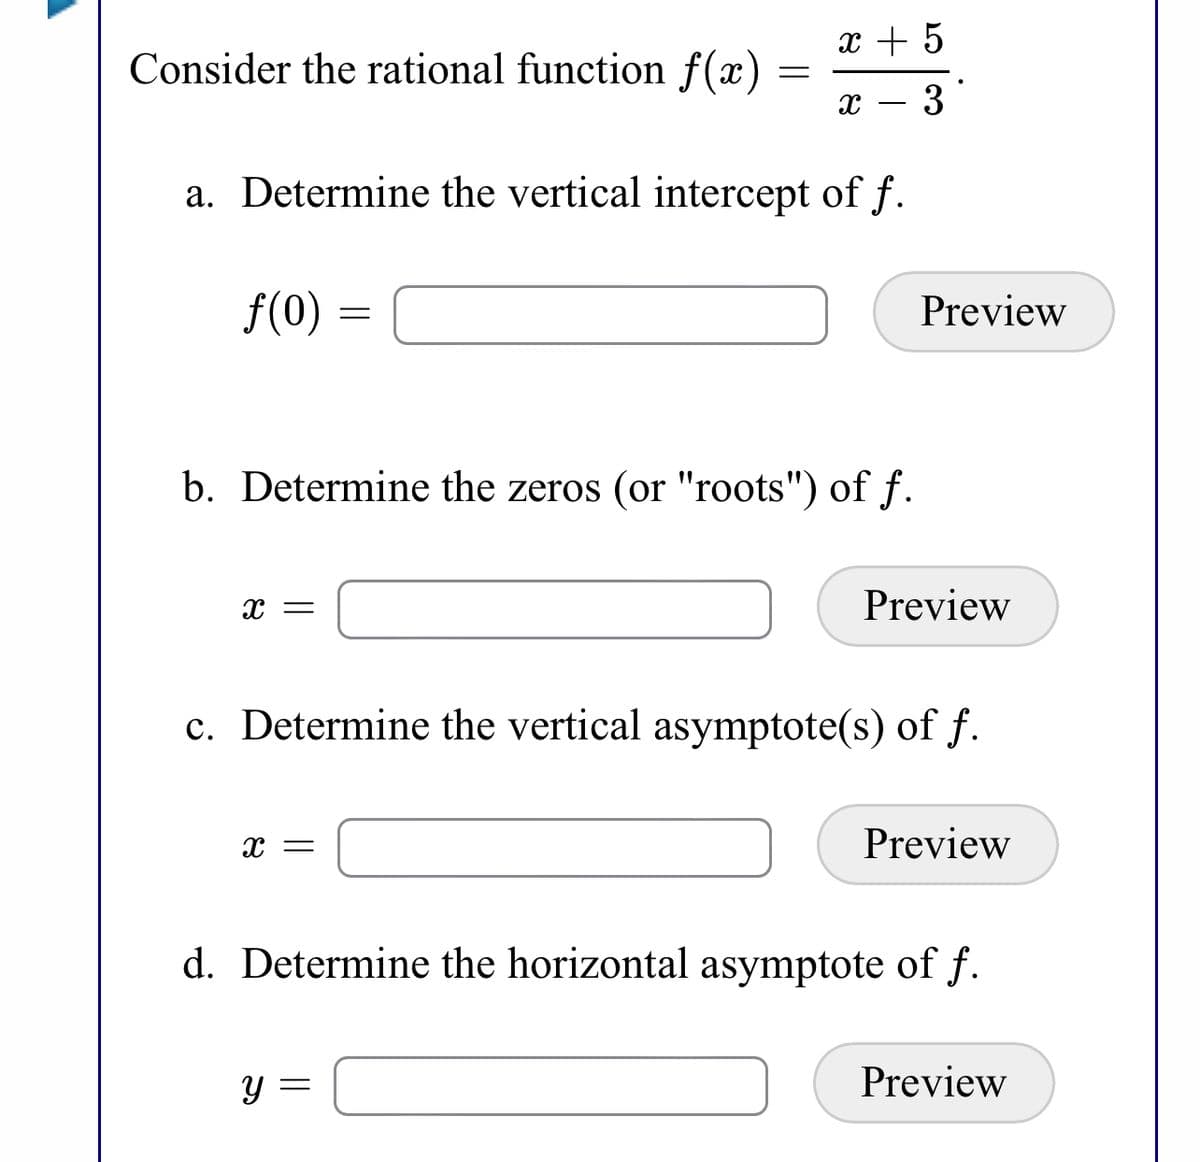 x + 5
Consider the rational function f(x)
3
a. Determine the vertical intercept of f.
f(0) =
Preview
b. Determine the zeros (or "roots") of f.
Preview
c. Determine the vertical asymptote(s) of f.
Preview
d. Determine the horizontal asymptote of f.
Preview
Y =
